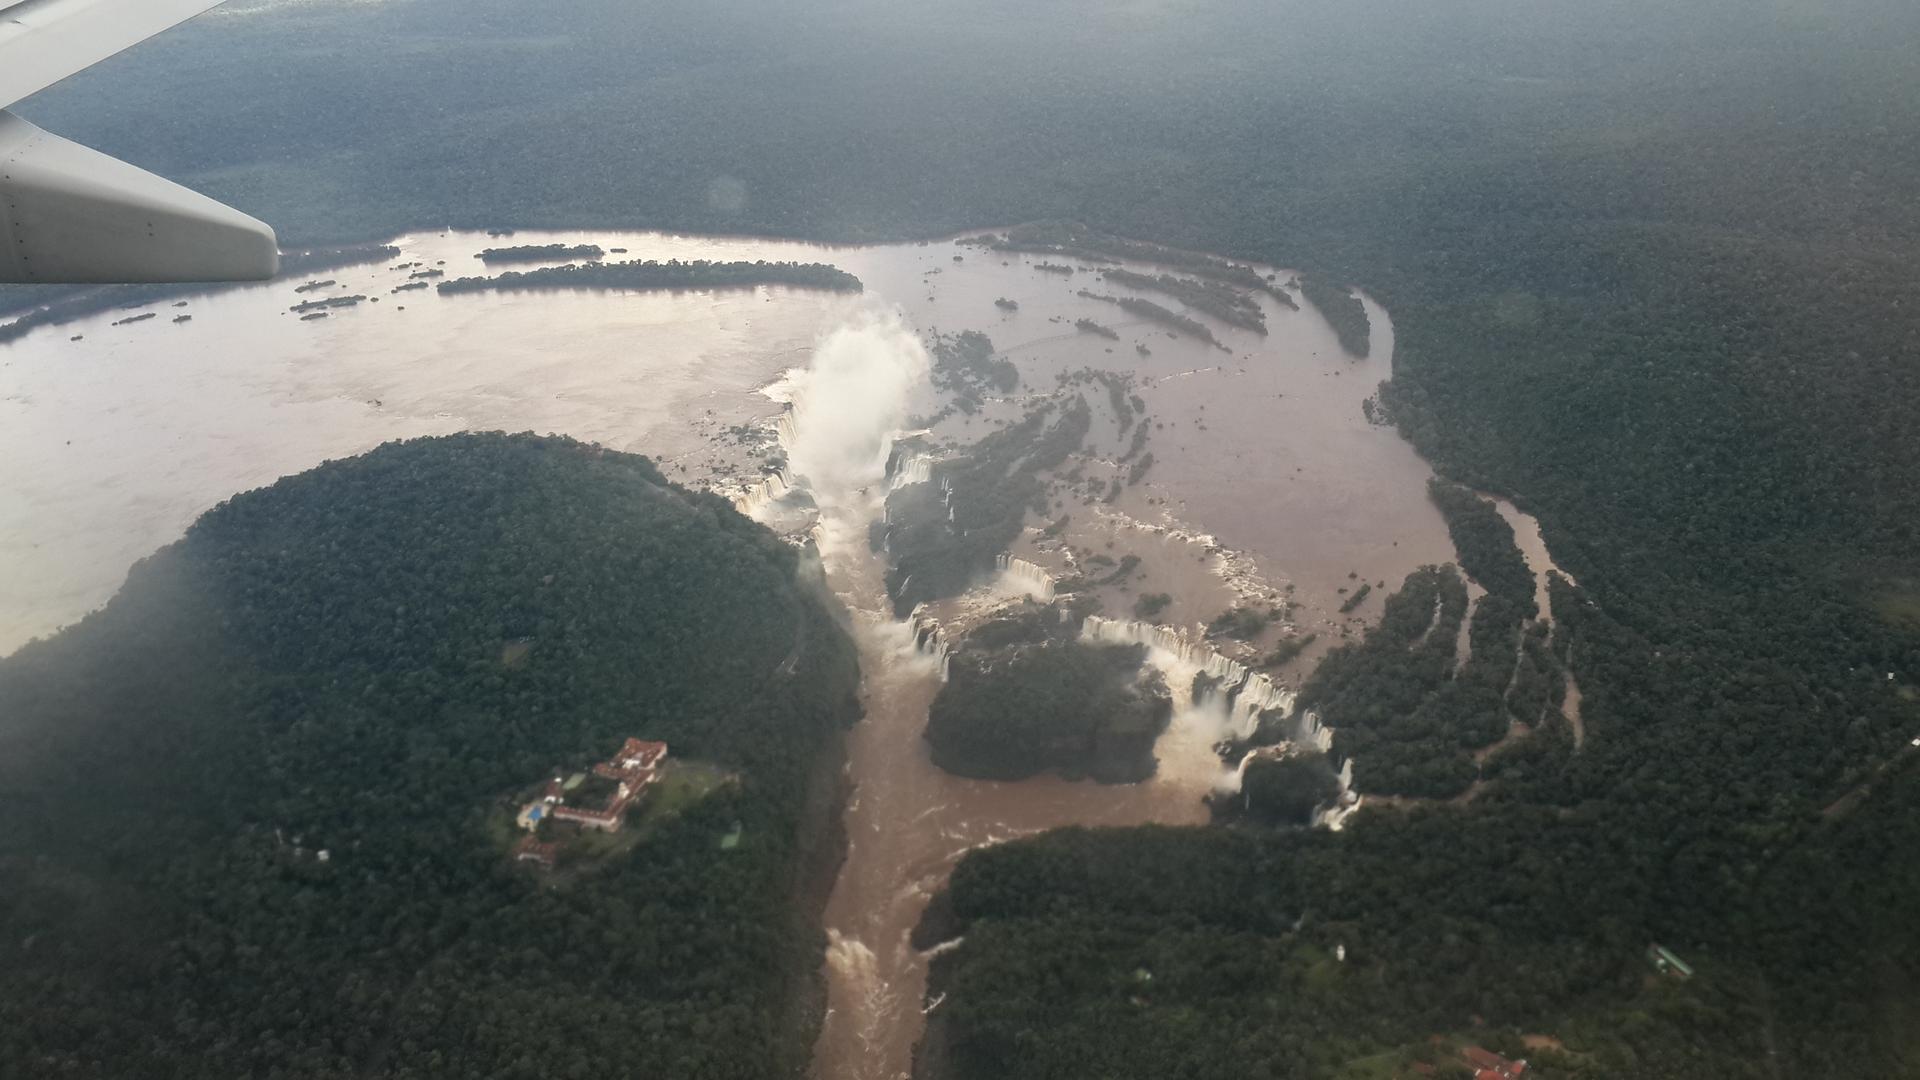 Iguazu falls from airplane. The captain made sure that everybody in the plane sees the falls.